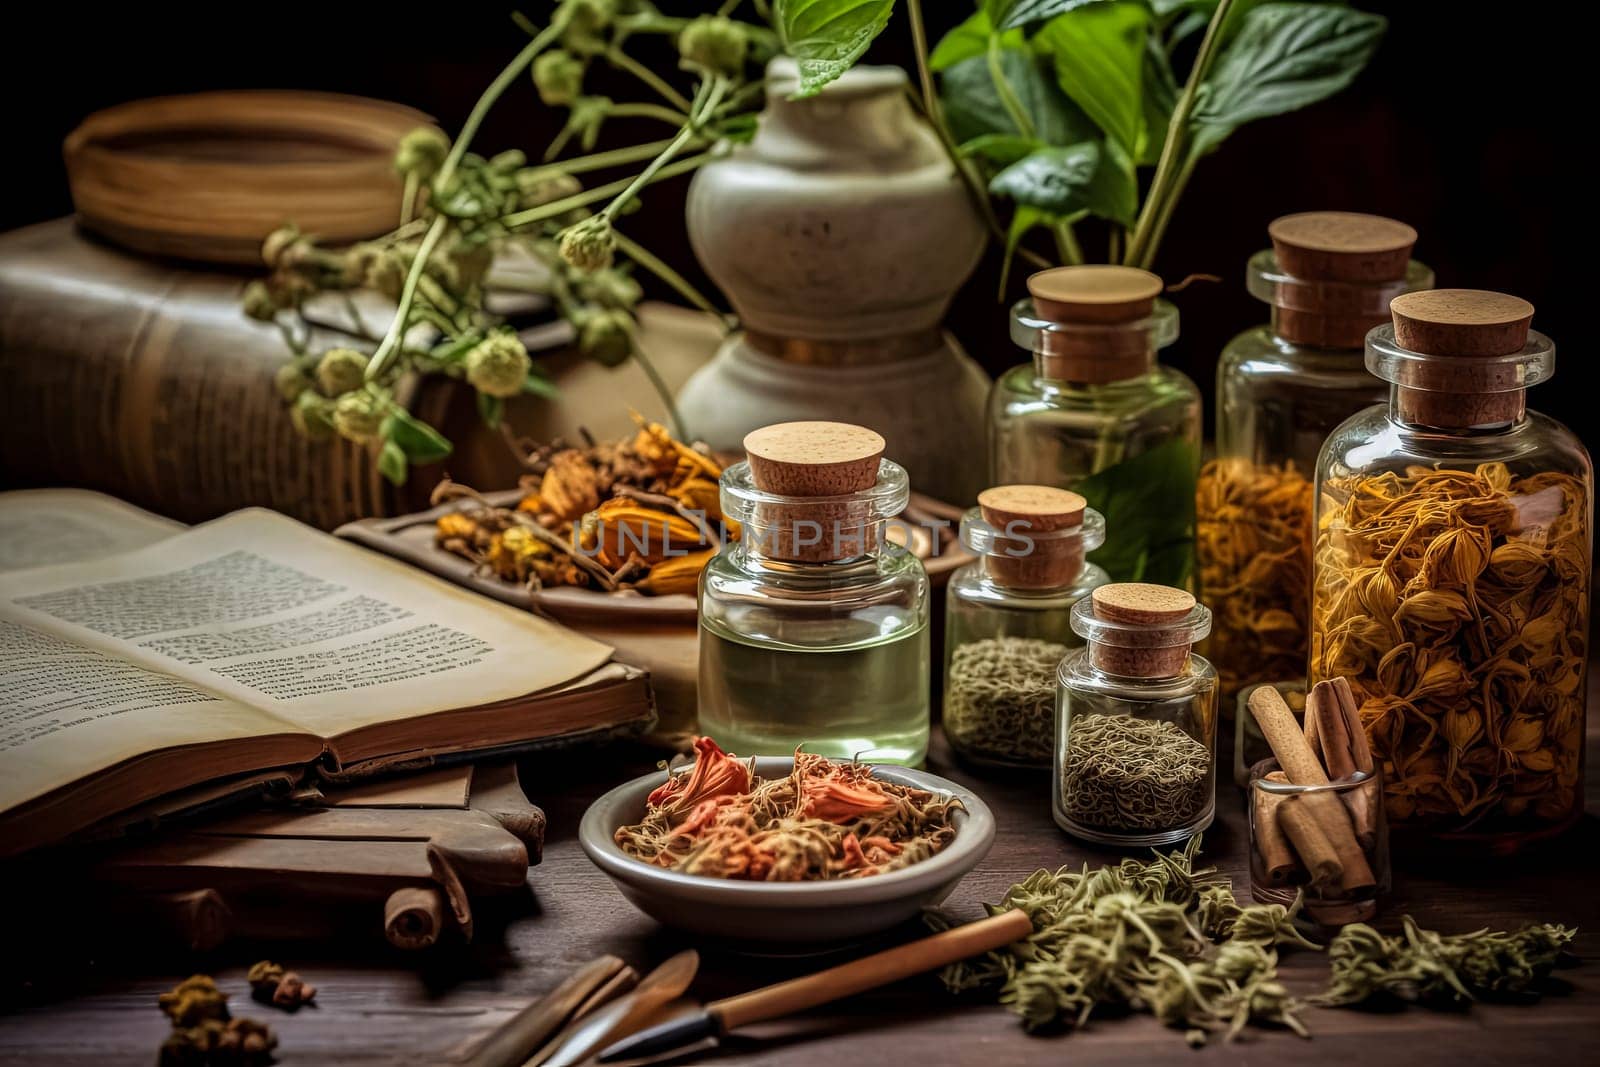 A table full of spices and herbs, including cinnamon, cumin, and pepper. The spices are arranged in small jars and bowls, and there is a spoon nearby. Concept of abundance and variety